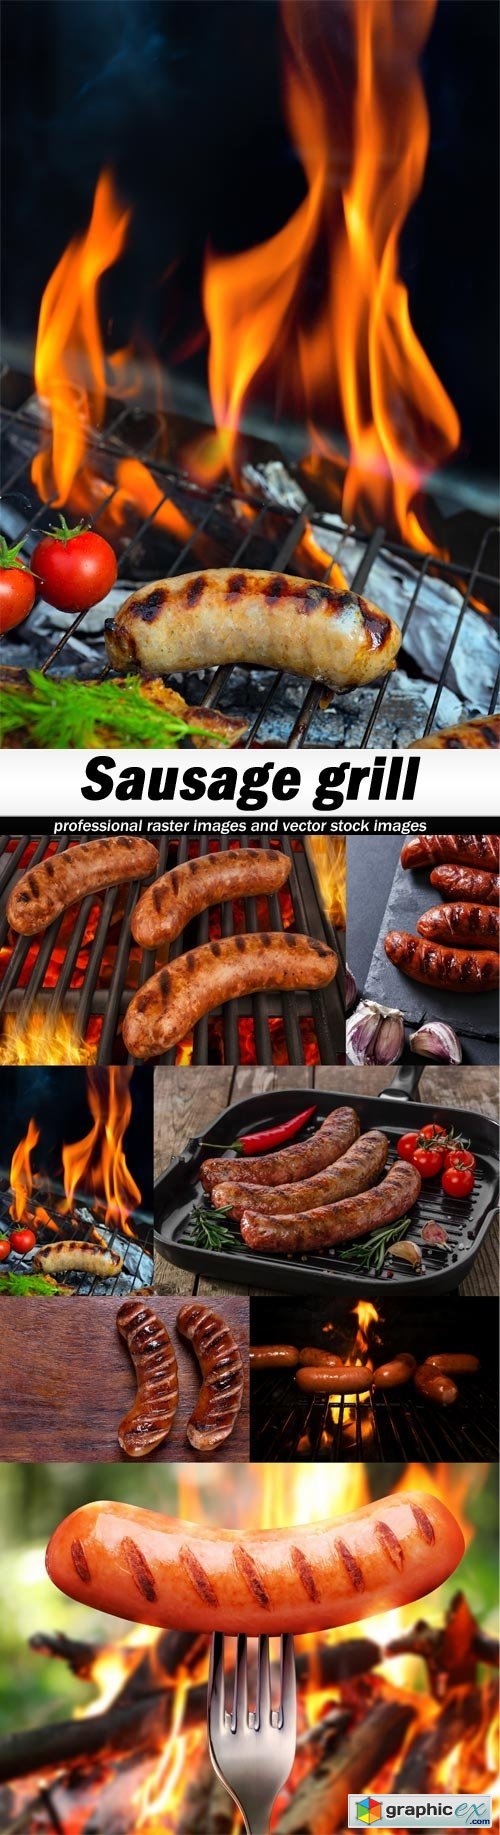 Sausage grill-7xJPEGs